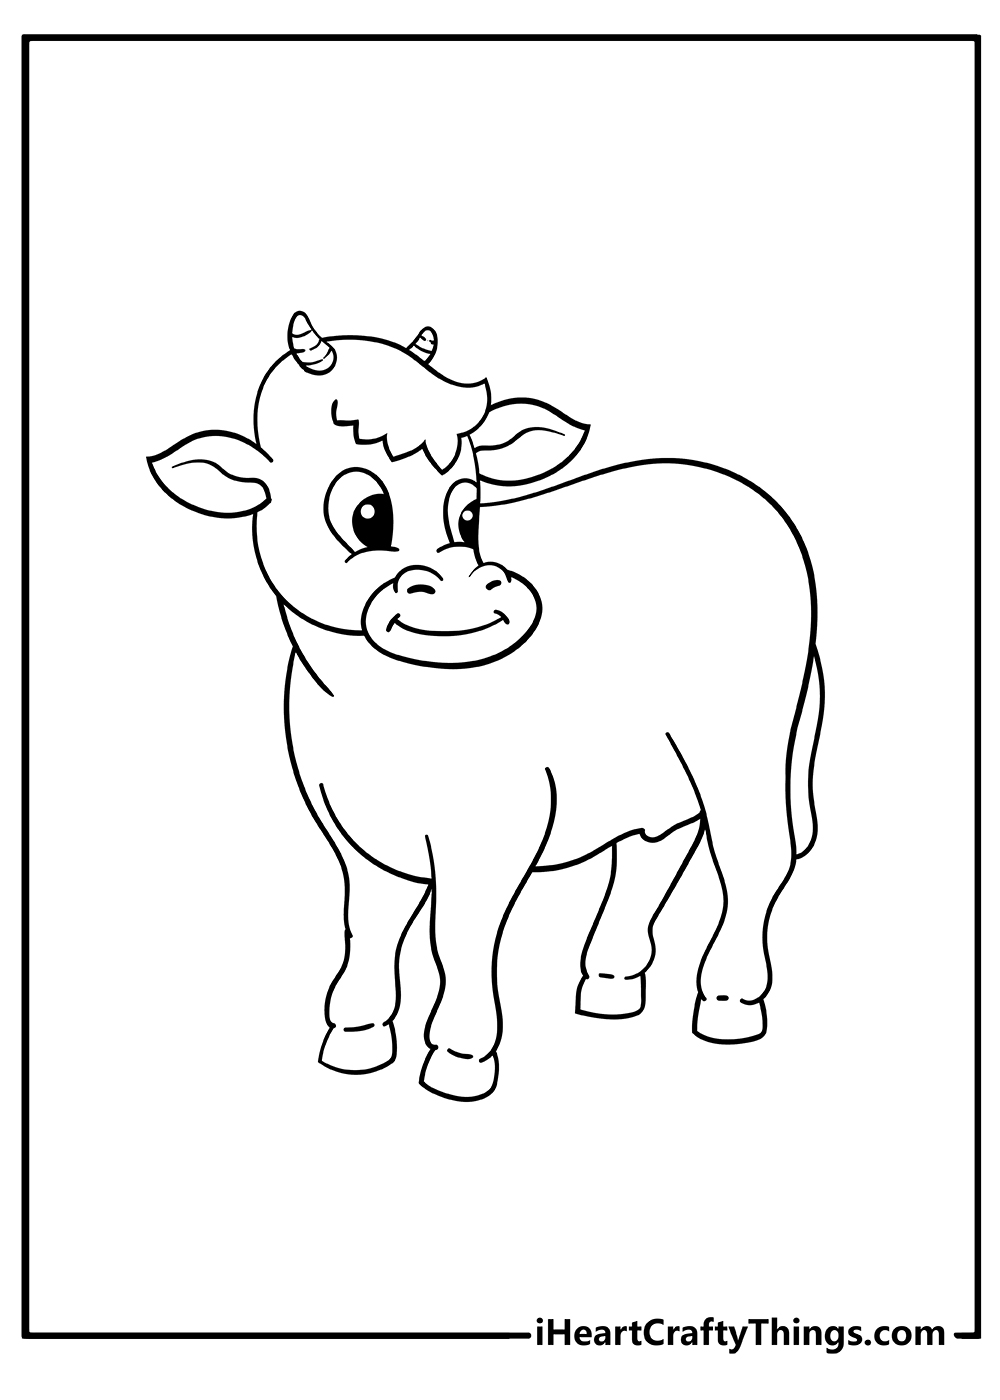 Cow Coloring Pages for preschoolers free printable